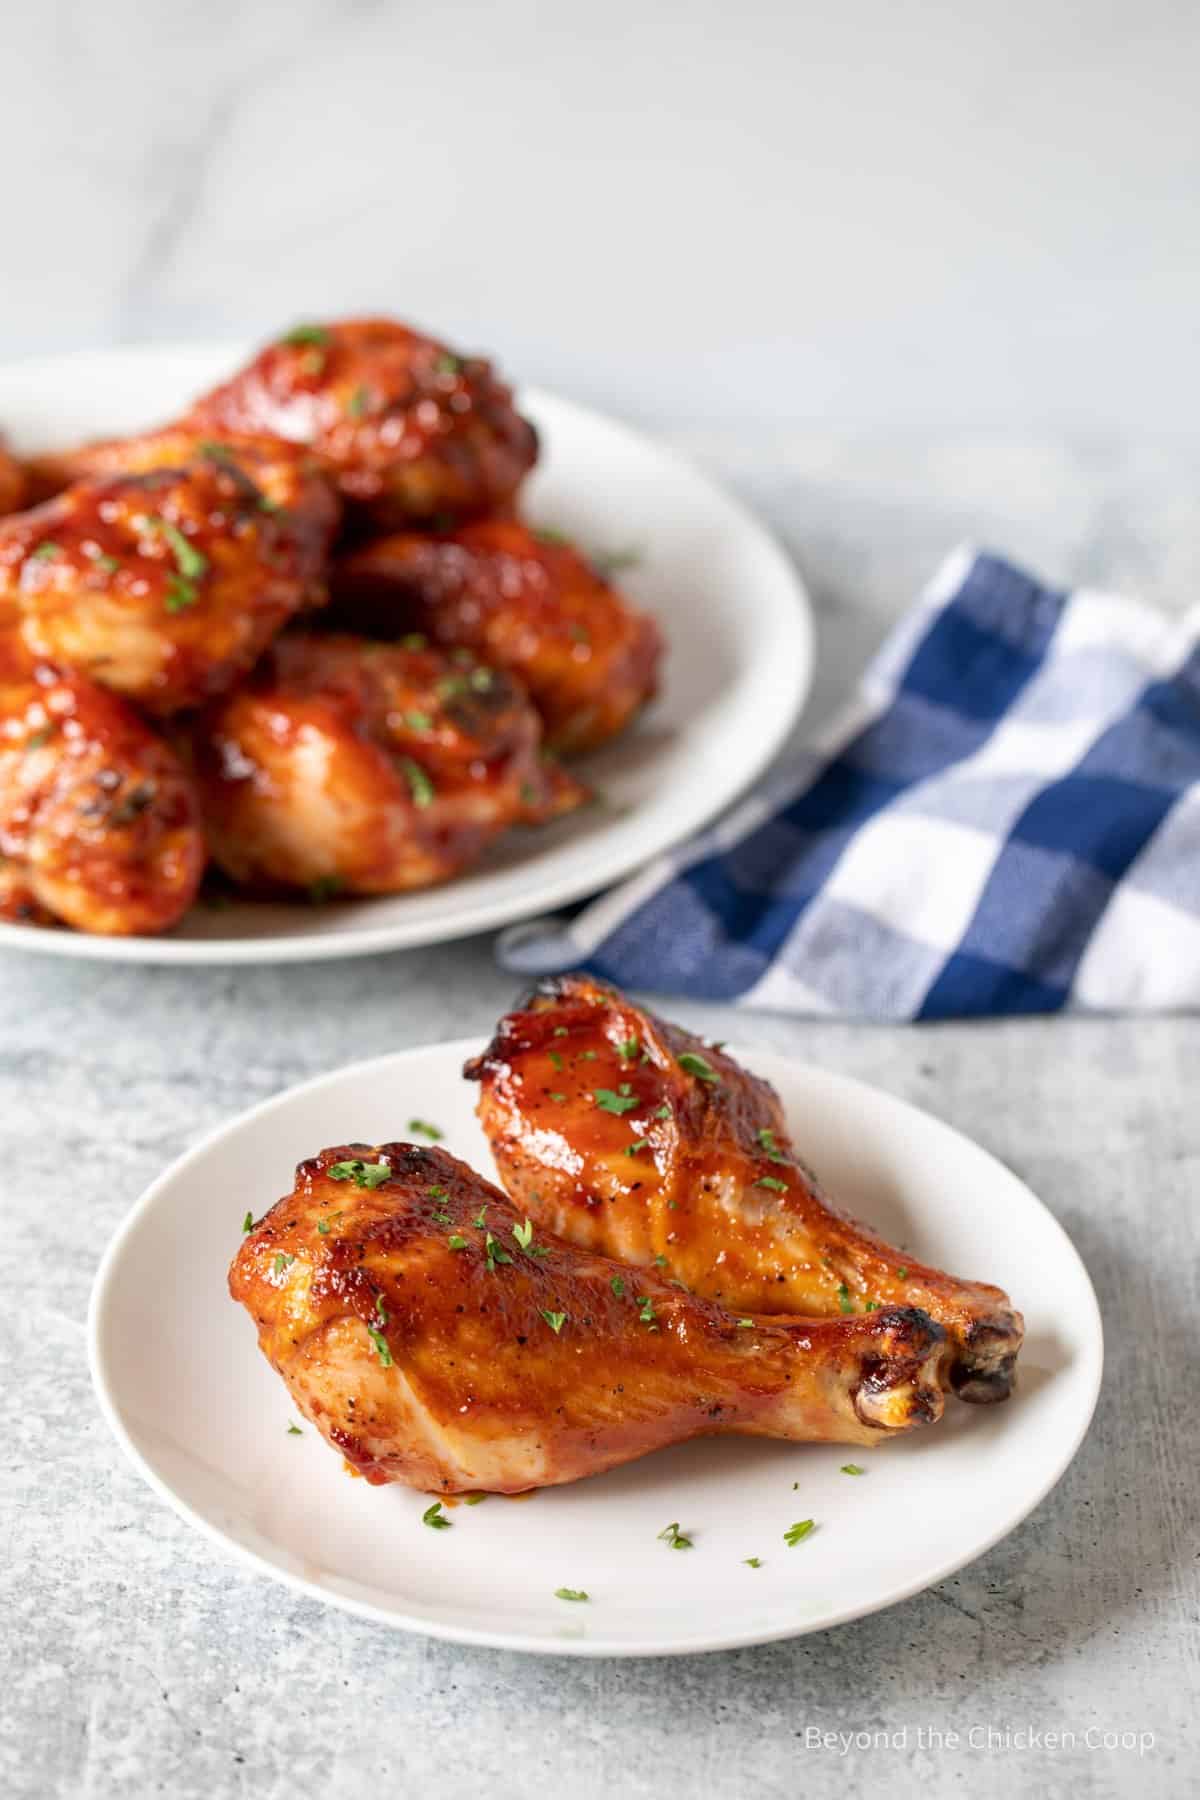 Chicken drumsticks covered with barbecue sauce.